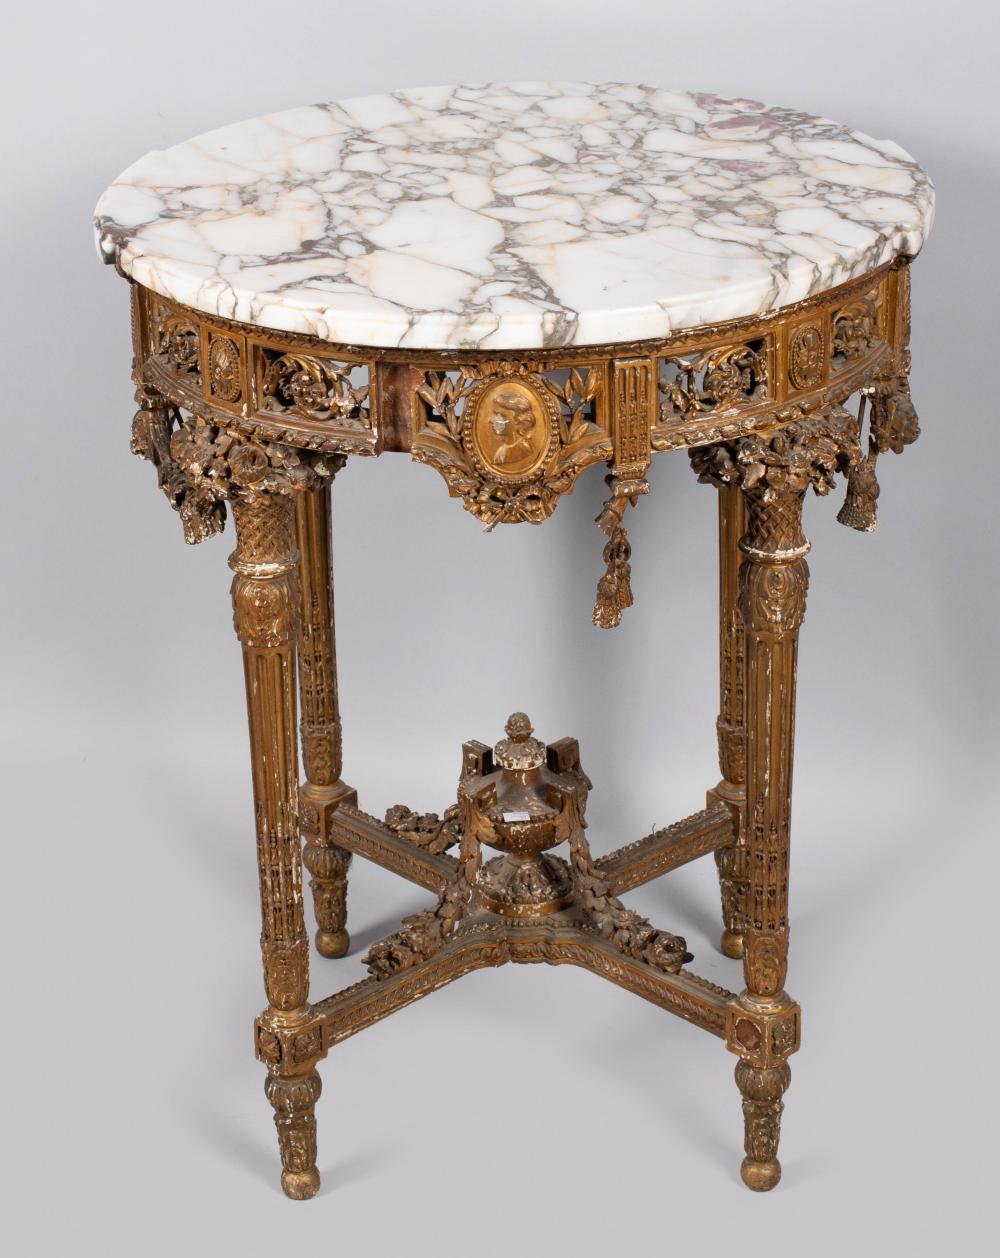 LOUIS XVI STYLE GILTWOOD AND COMPOSITION 33cb12